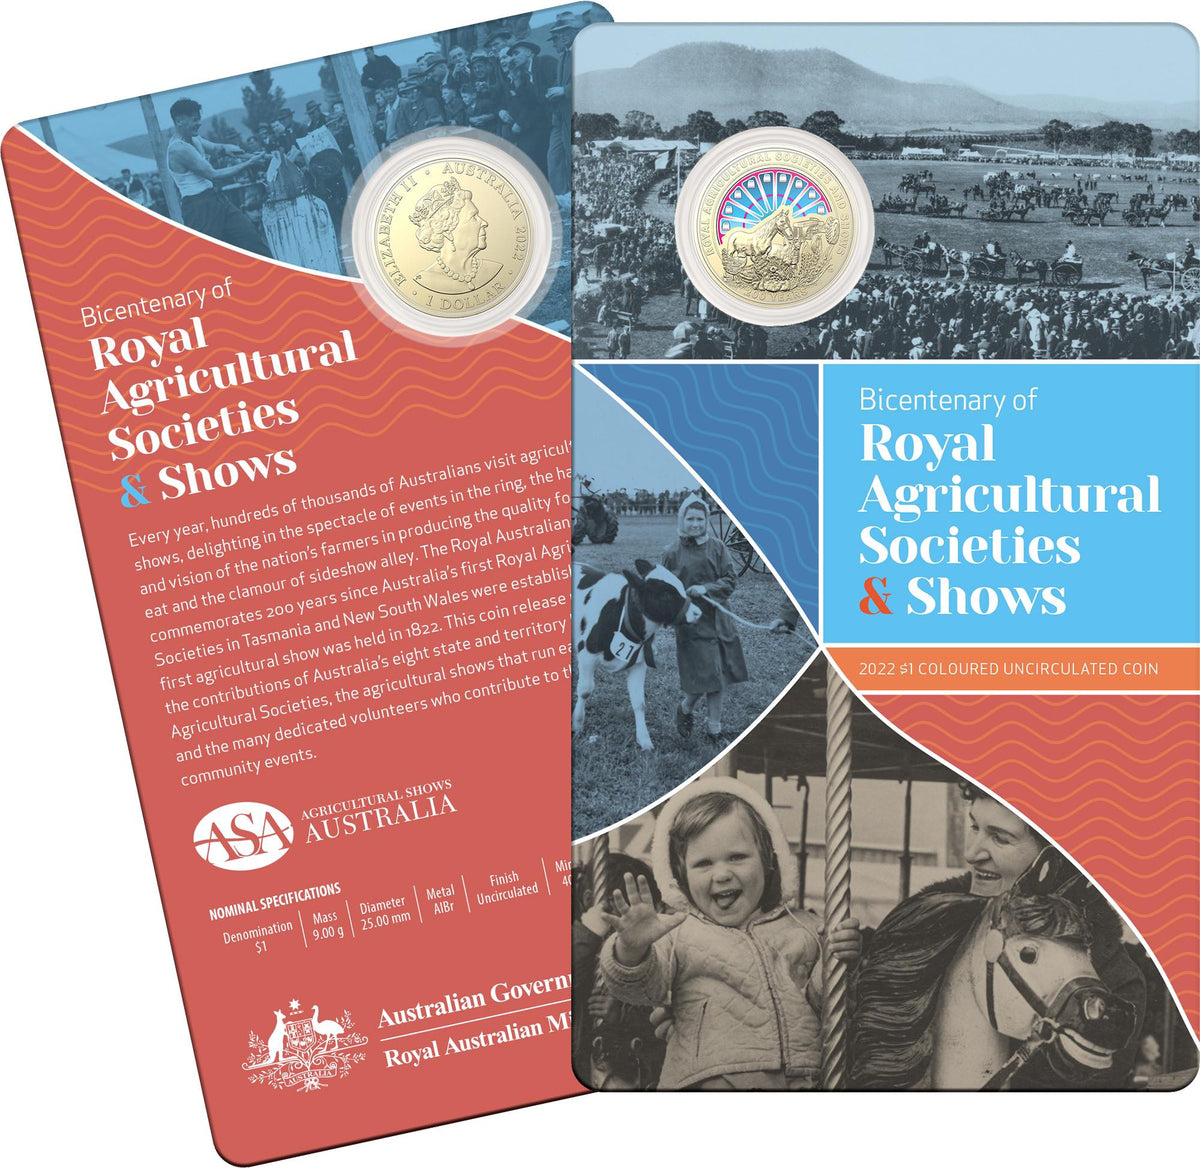 2022 Uncirculated Coloured $1 Coin. Bicentenary of Royal Agricultural Societies and Shows.